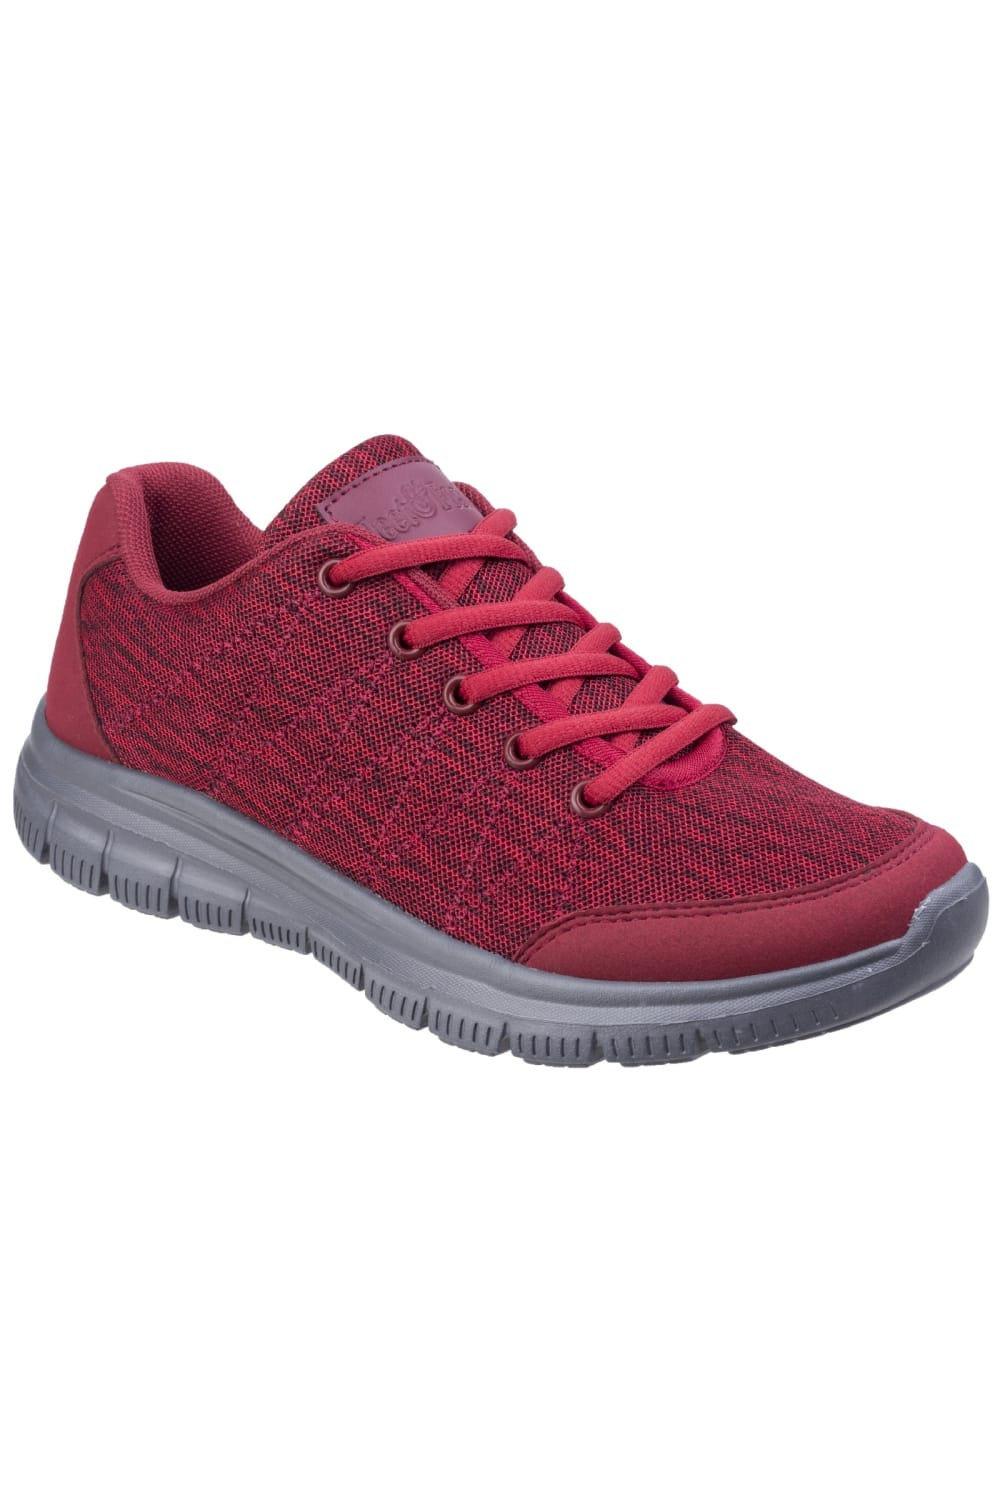 Womens/Ladies Elanor Lace Up Sneaker - Red